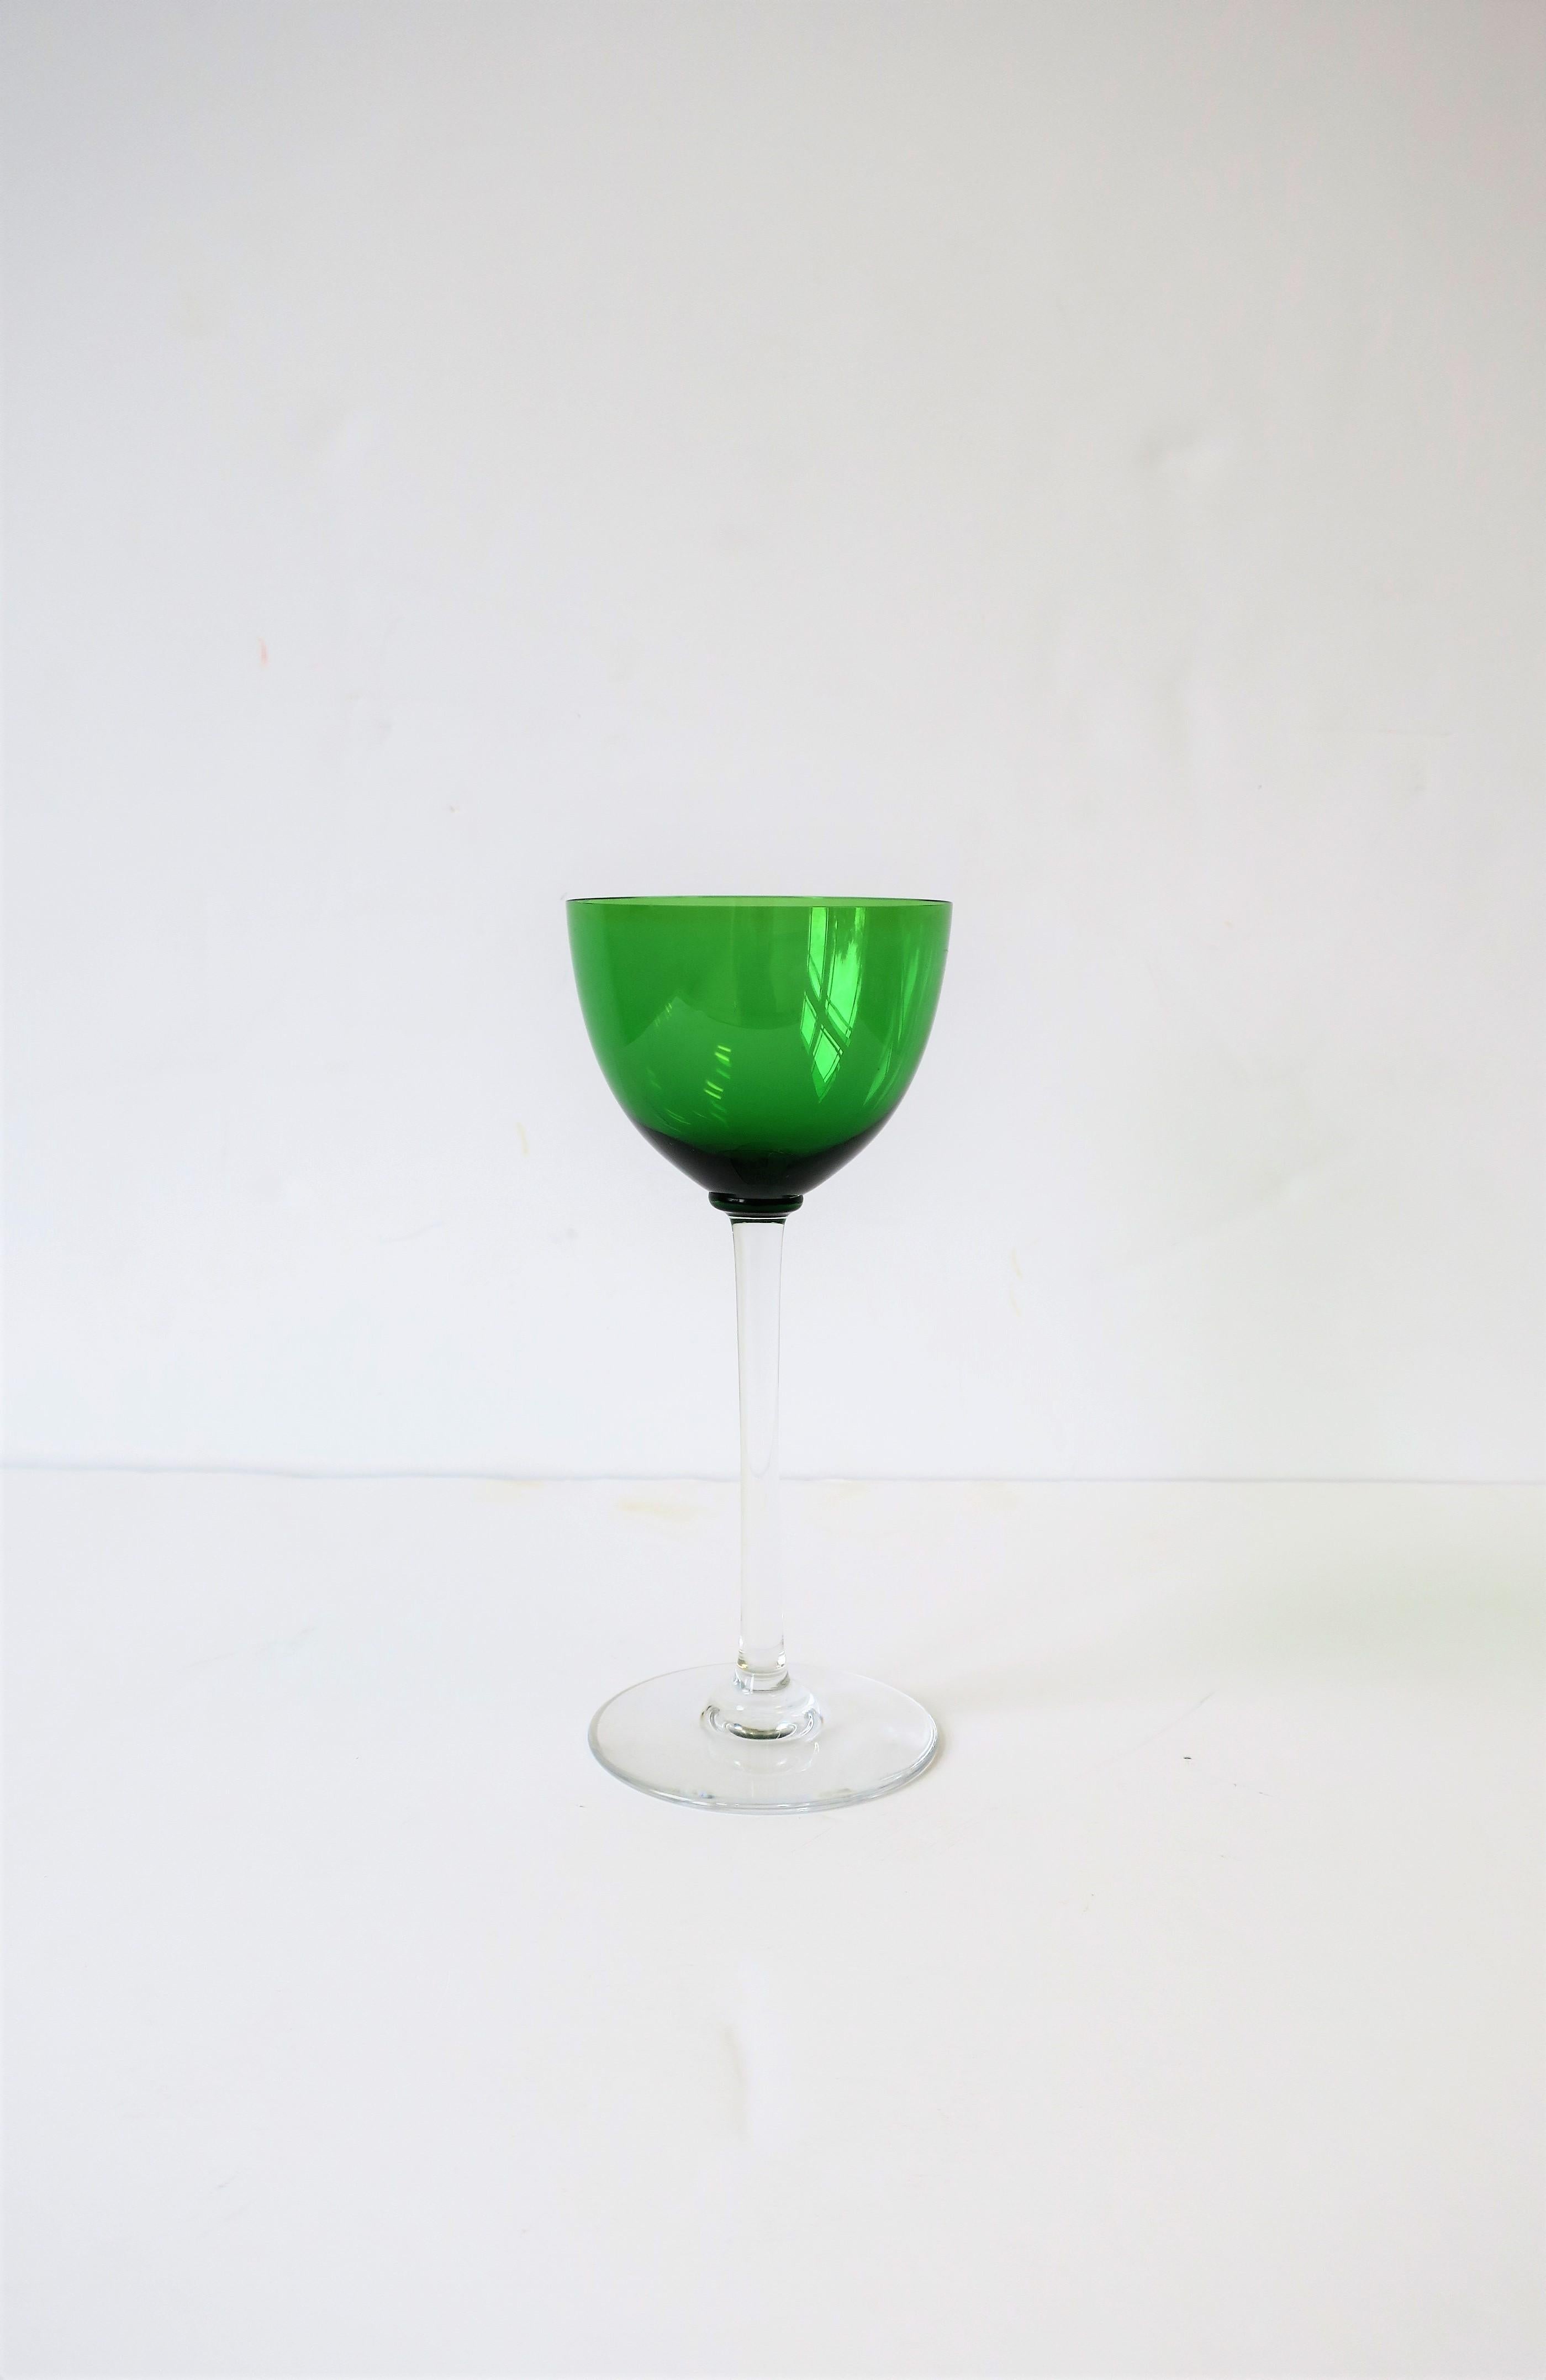 A beautiful French green and clear crystal wine or water glass/goblet by luxury maker Baccarat. Handcrafted crystal glass is 7.5 inches tall. Made in France. With maker's mark, 'Baccarat', and 'France', on bottom as show in image #4.